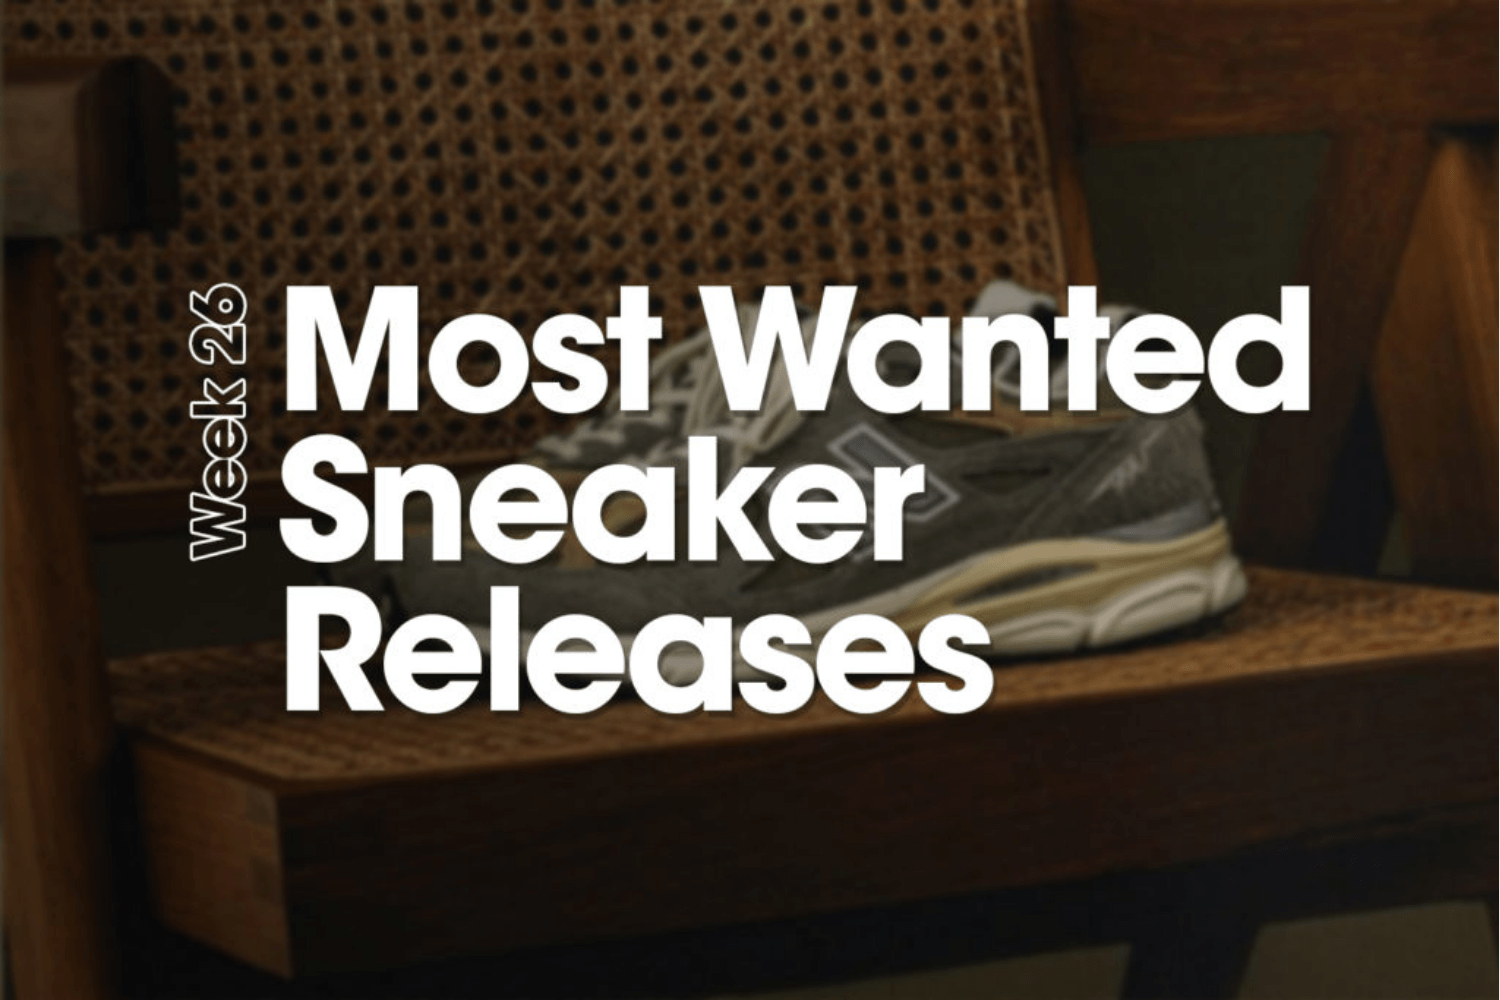 Most Wanted Sneaker Releases - Woche 26